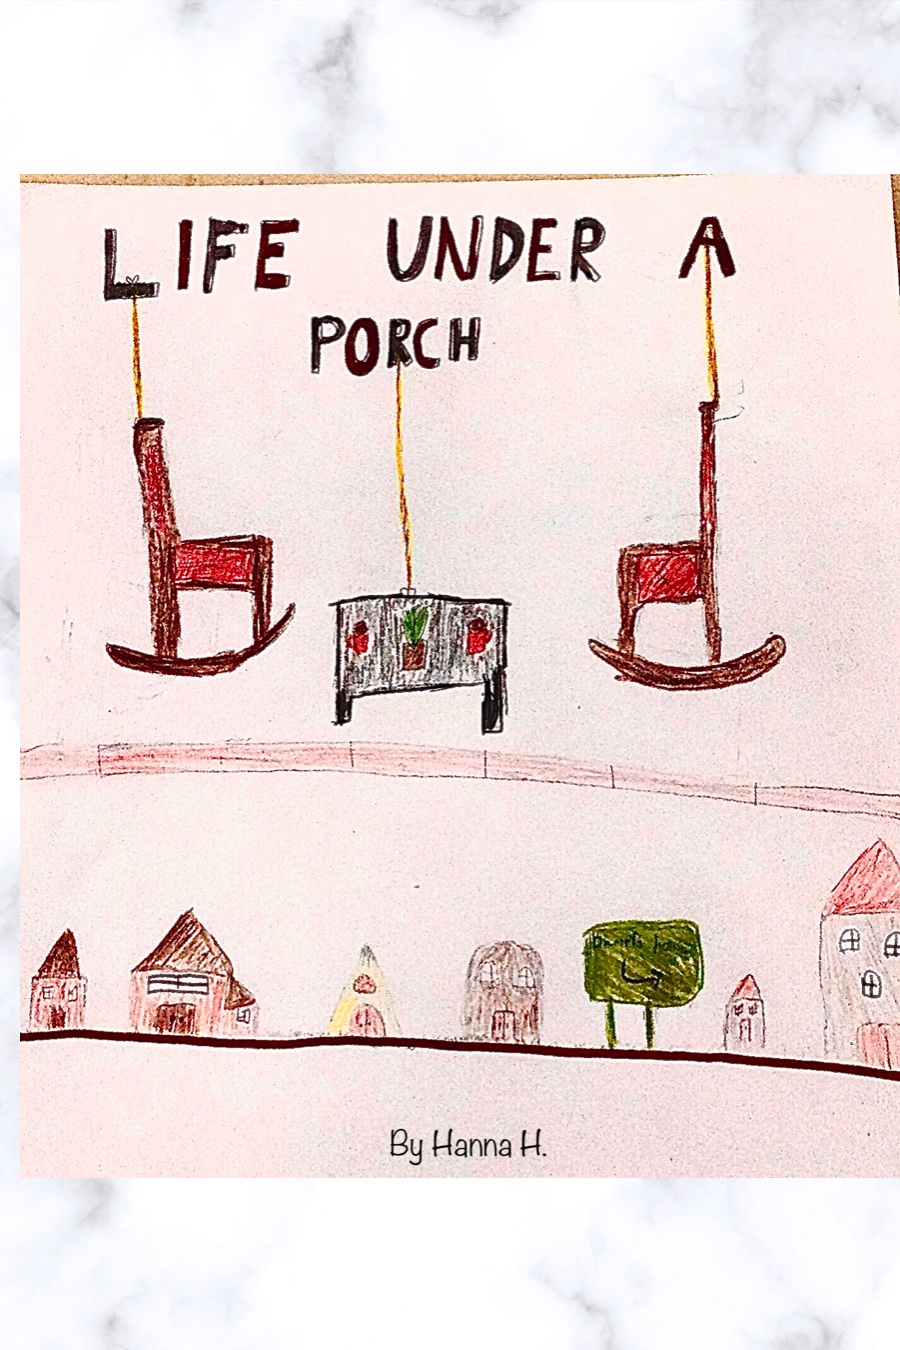 Life Under A Porch by Hanna H